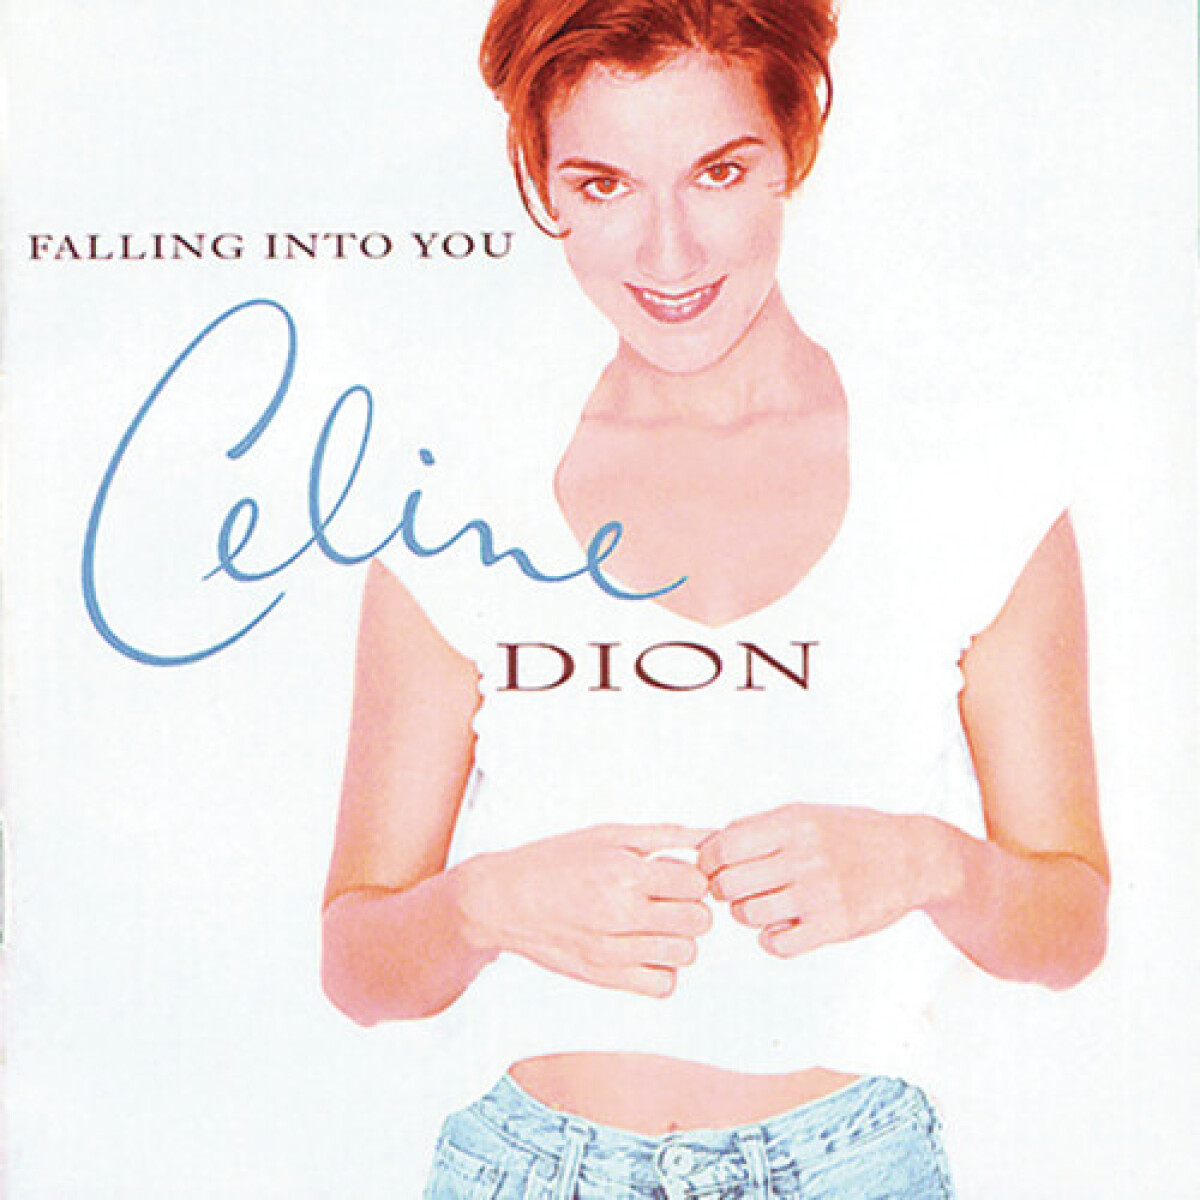 Dion Celine - Falling Into You 